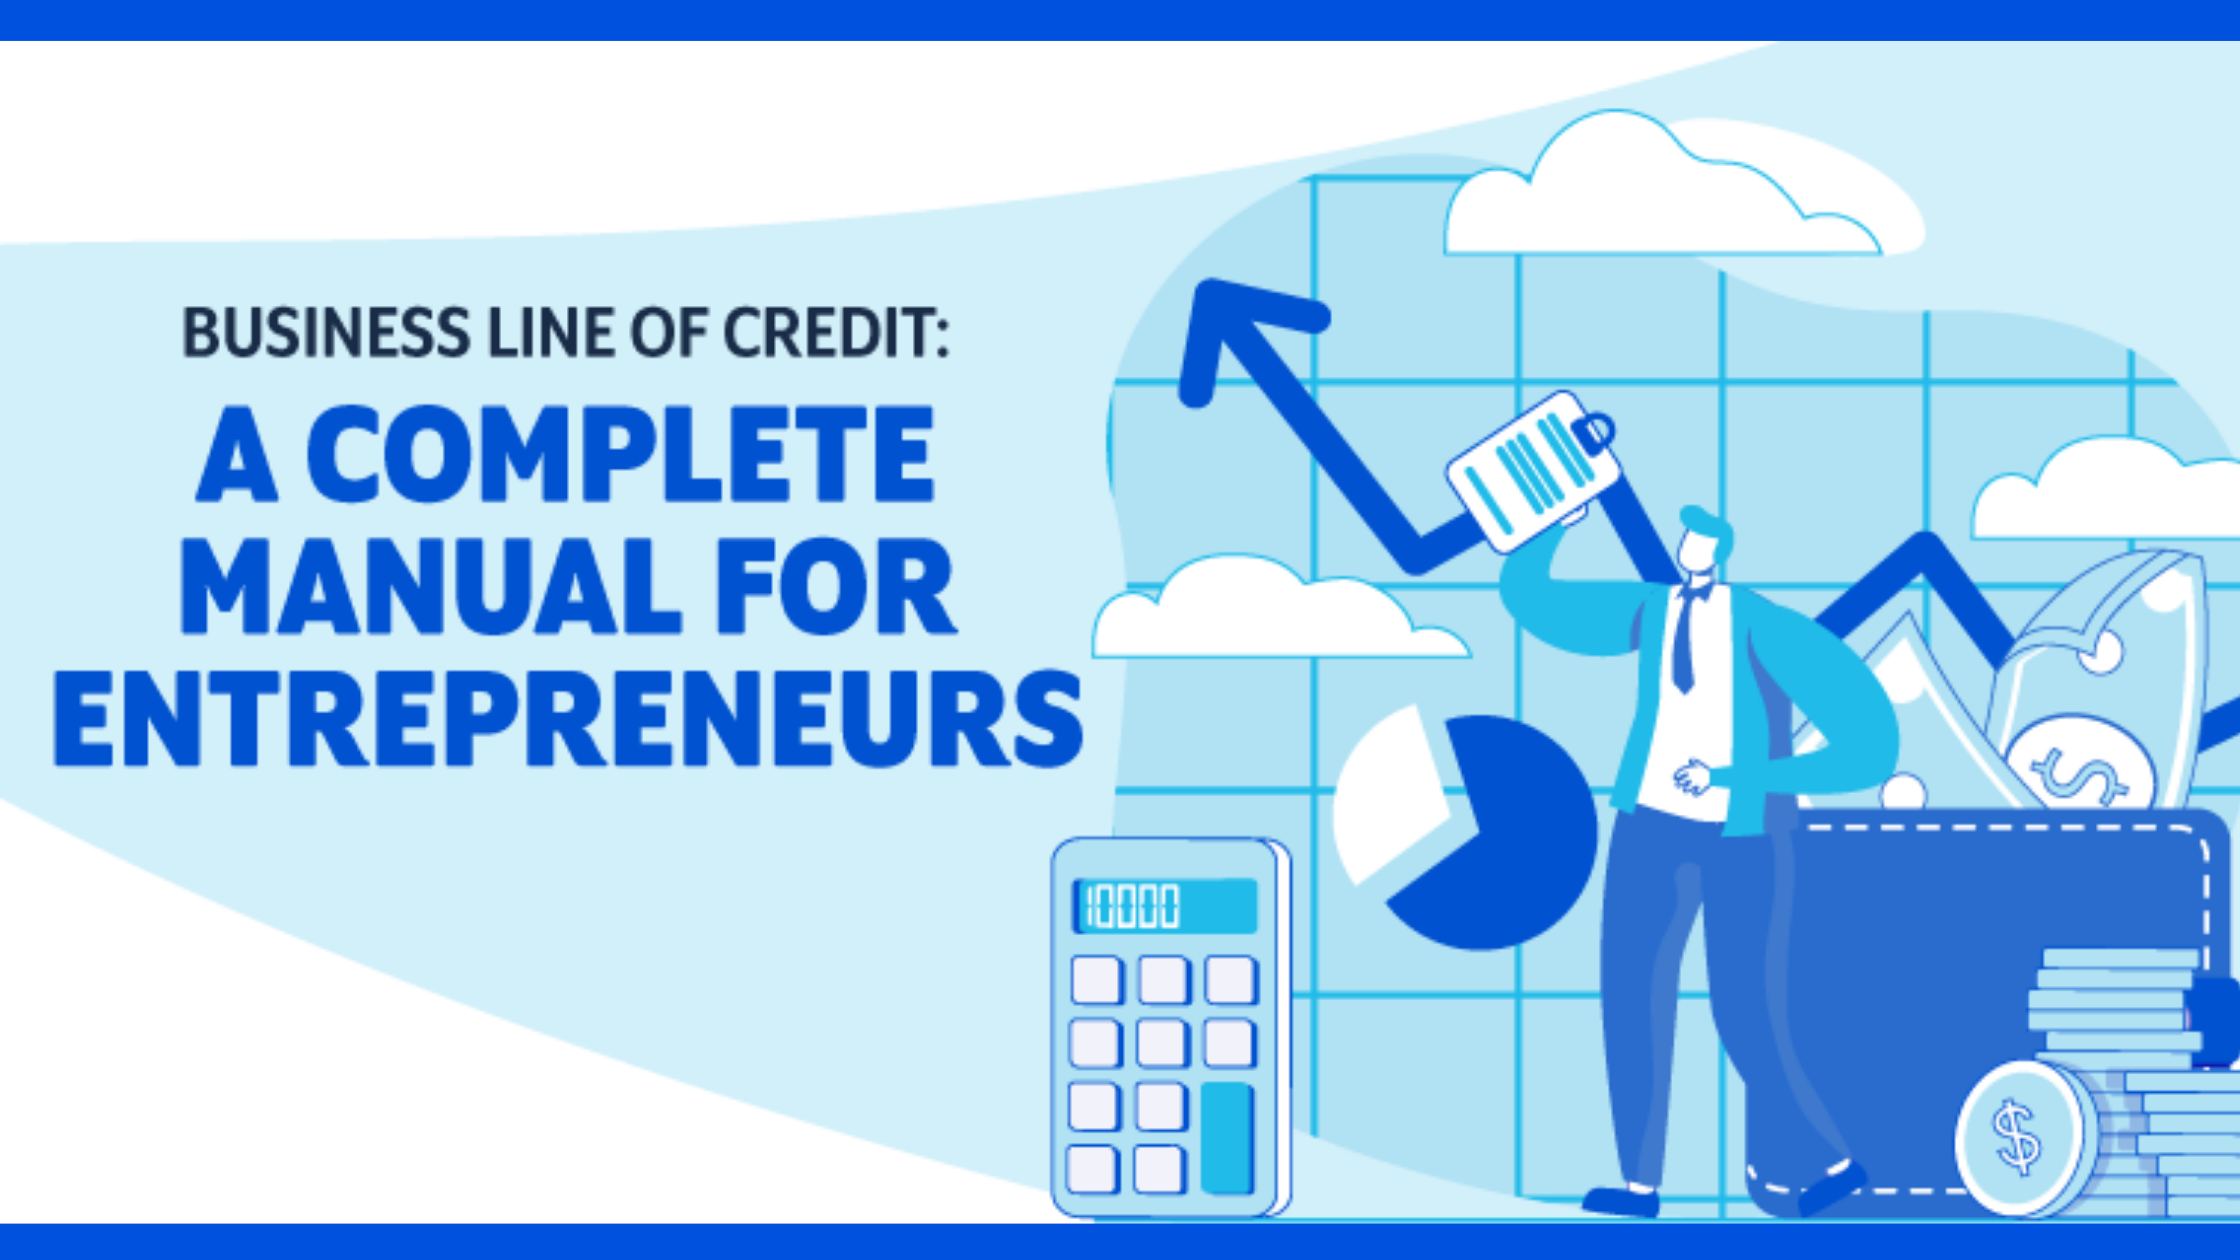 Business Line of Credit: A Complete Manual for Entrepreneurs